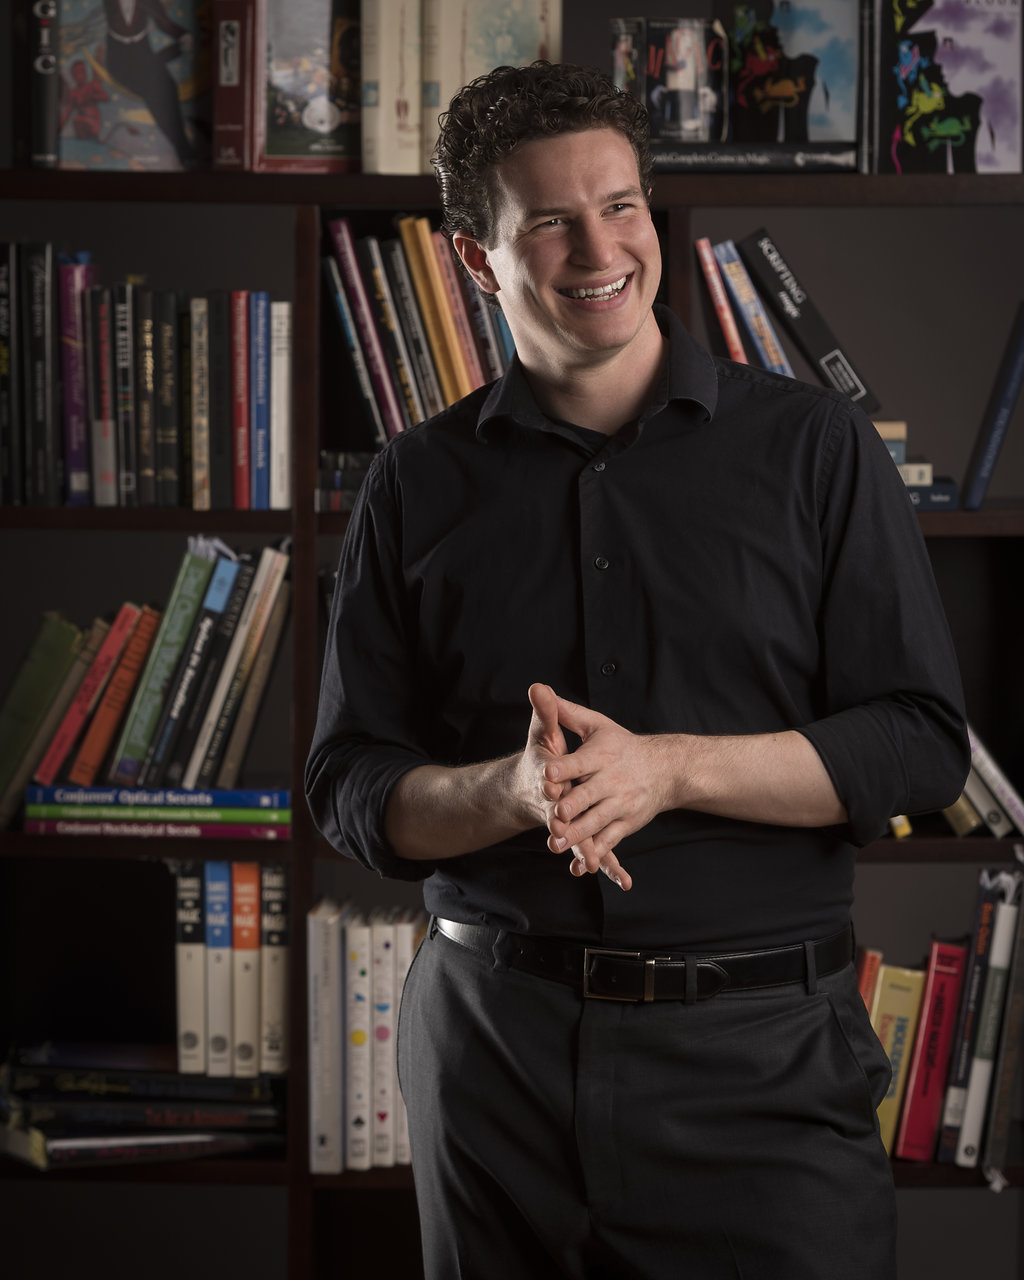 a white man with short black hair stands in front of a bookshelf. He is wearing a black button up shirt and black pants.